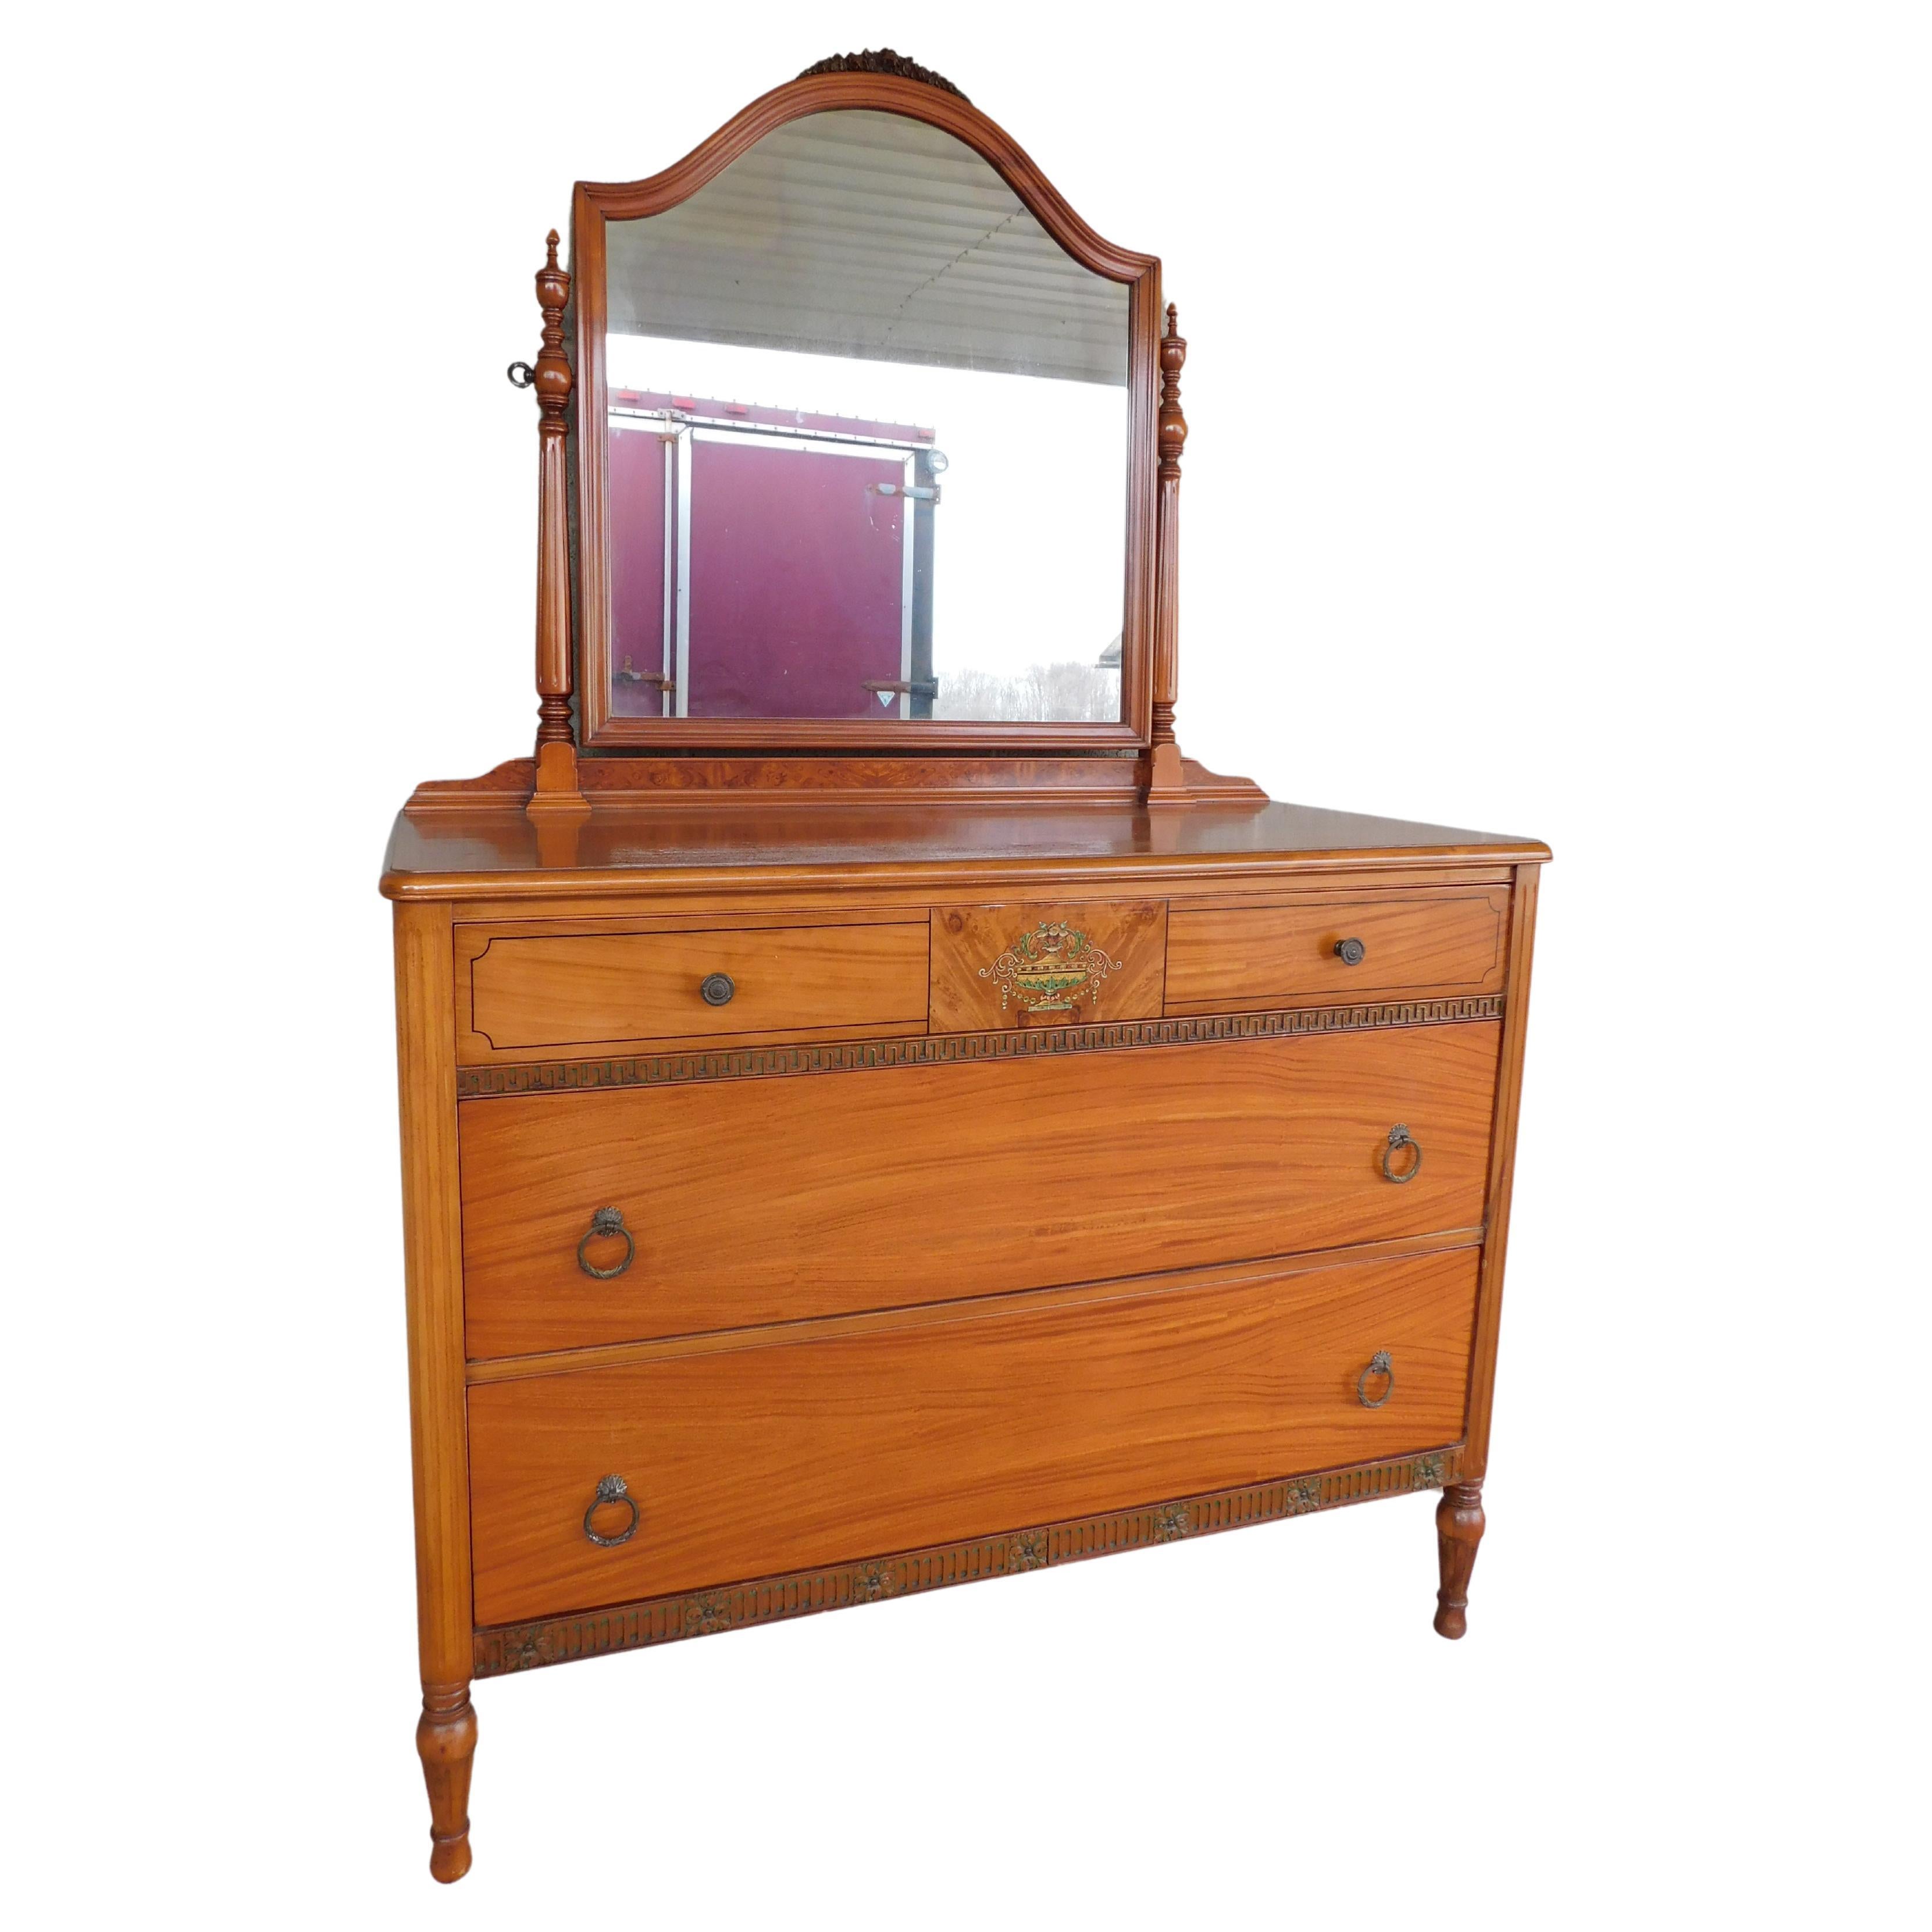 Antique Regency / Adams Style satinwood, satinwood veneers,  with hand painted urn bouquet centers the drawer front on top of a burl walnut veneer inlay
Very good condition, previously refinished., 3 Dovetailed Drawers, with attached mirror